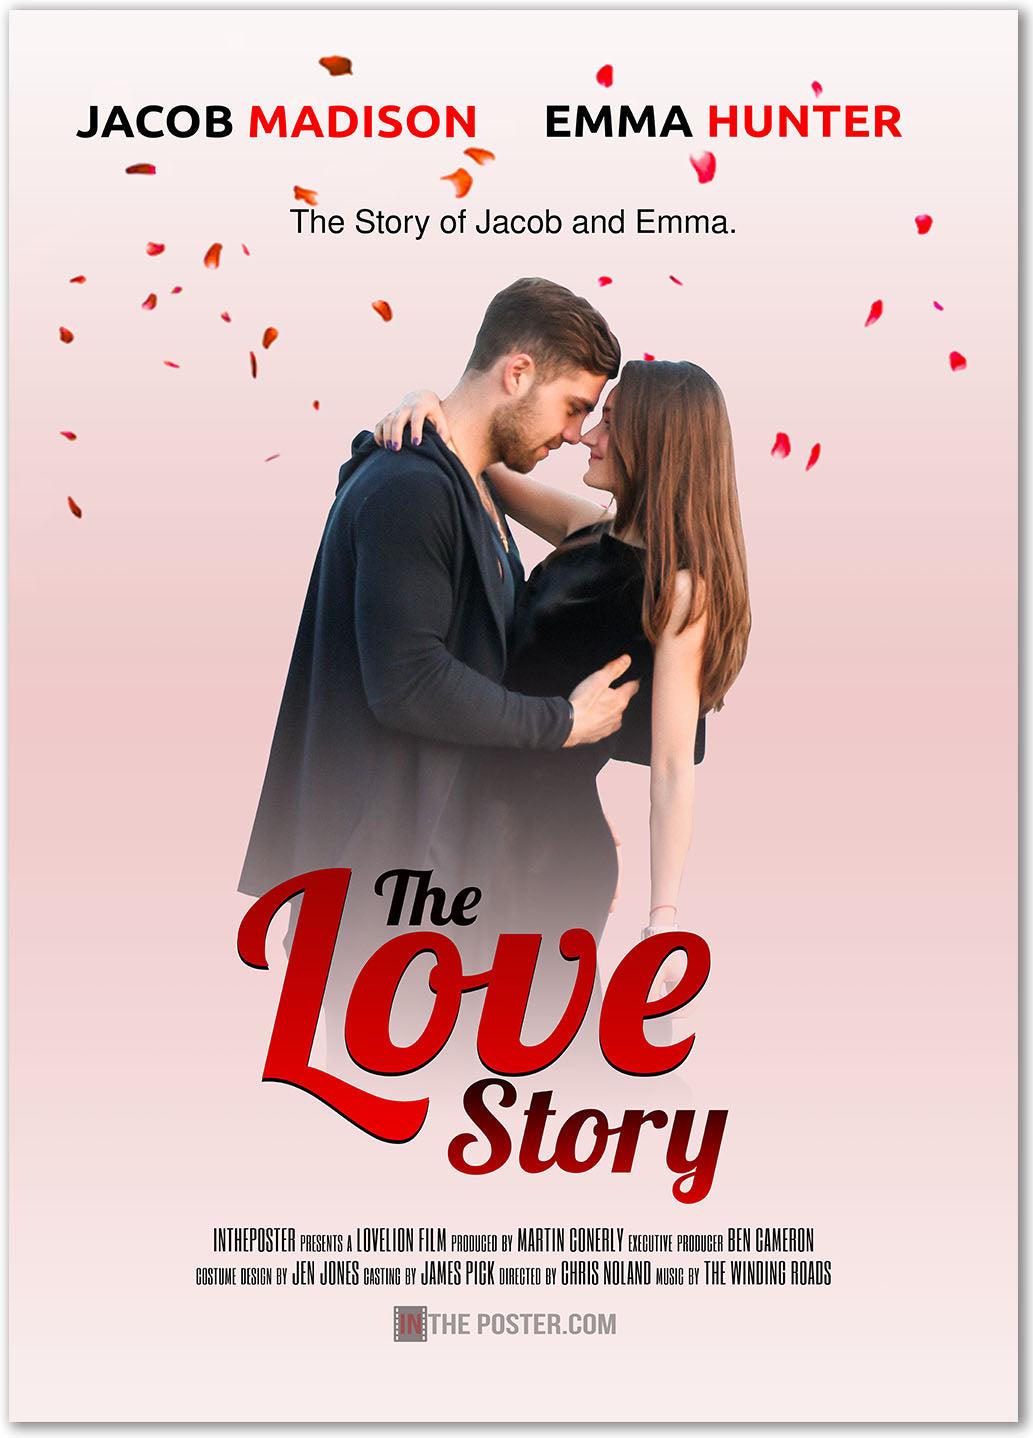 A film poster featuring a romantic couple in an embrace dressed in black, with rose petals falling and their names at the top of their love story poster